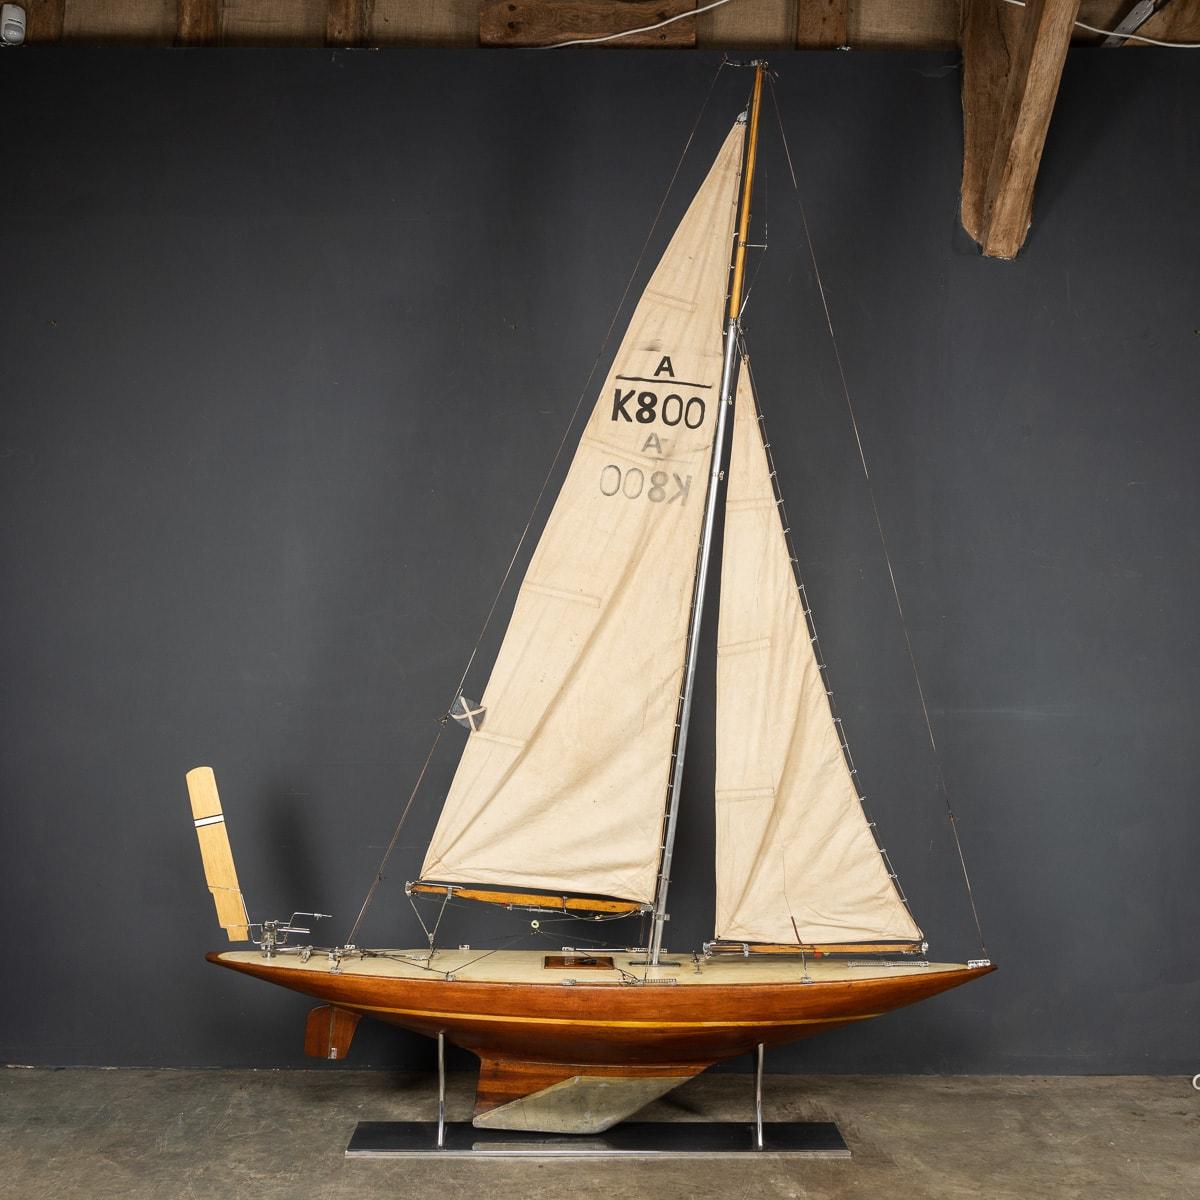 Registered as A K800, this pond yacht with a plank on frame hull, made in mahogany and cream painted plank lined deck. This classic A Class yacht would have been made in the 1960's by two or more people adhering to strict planned guidelines. This